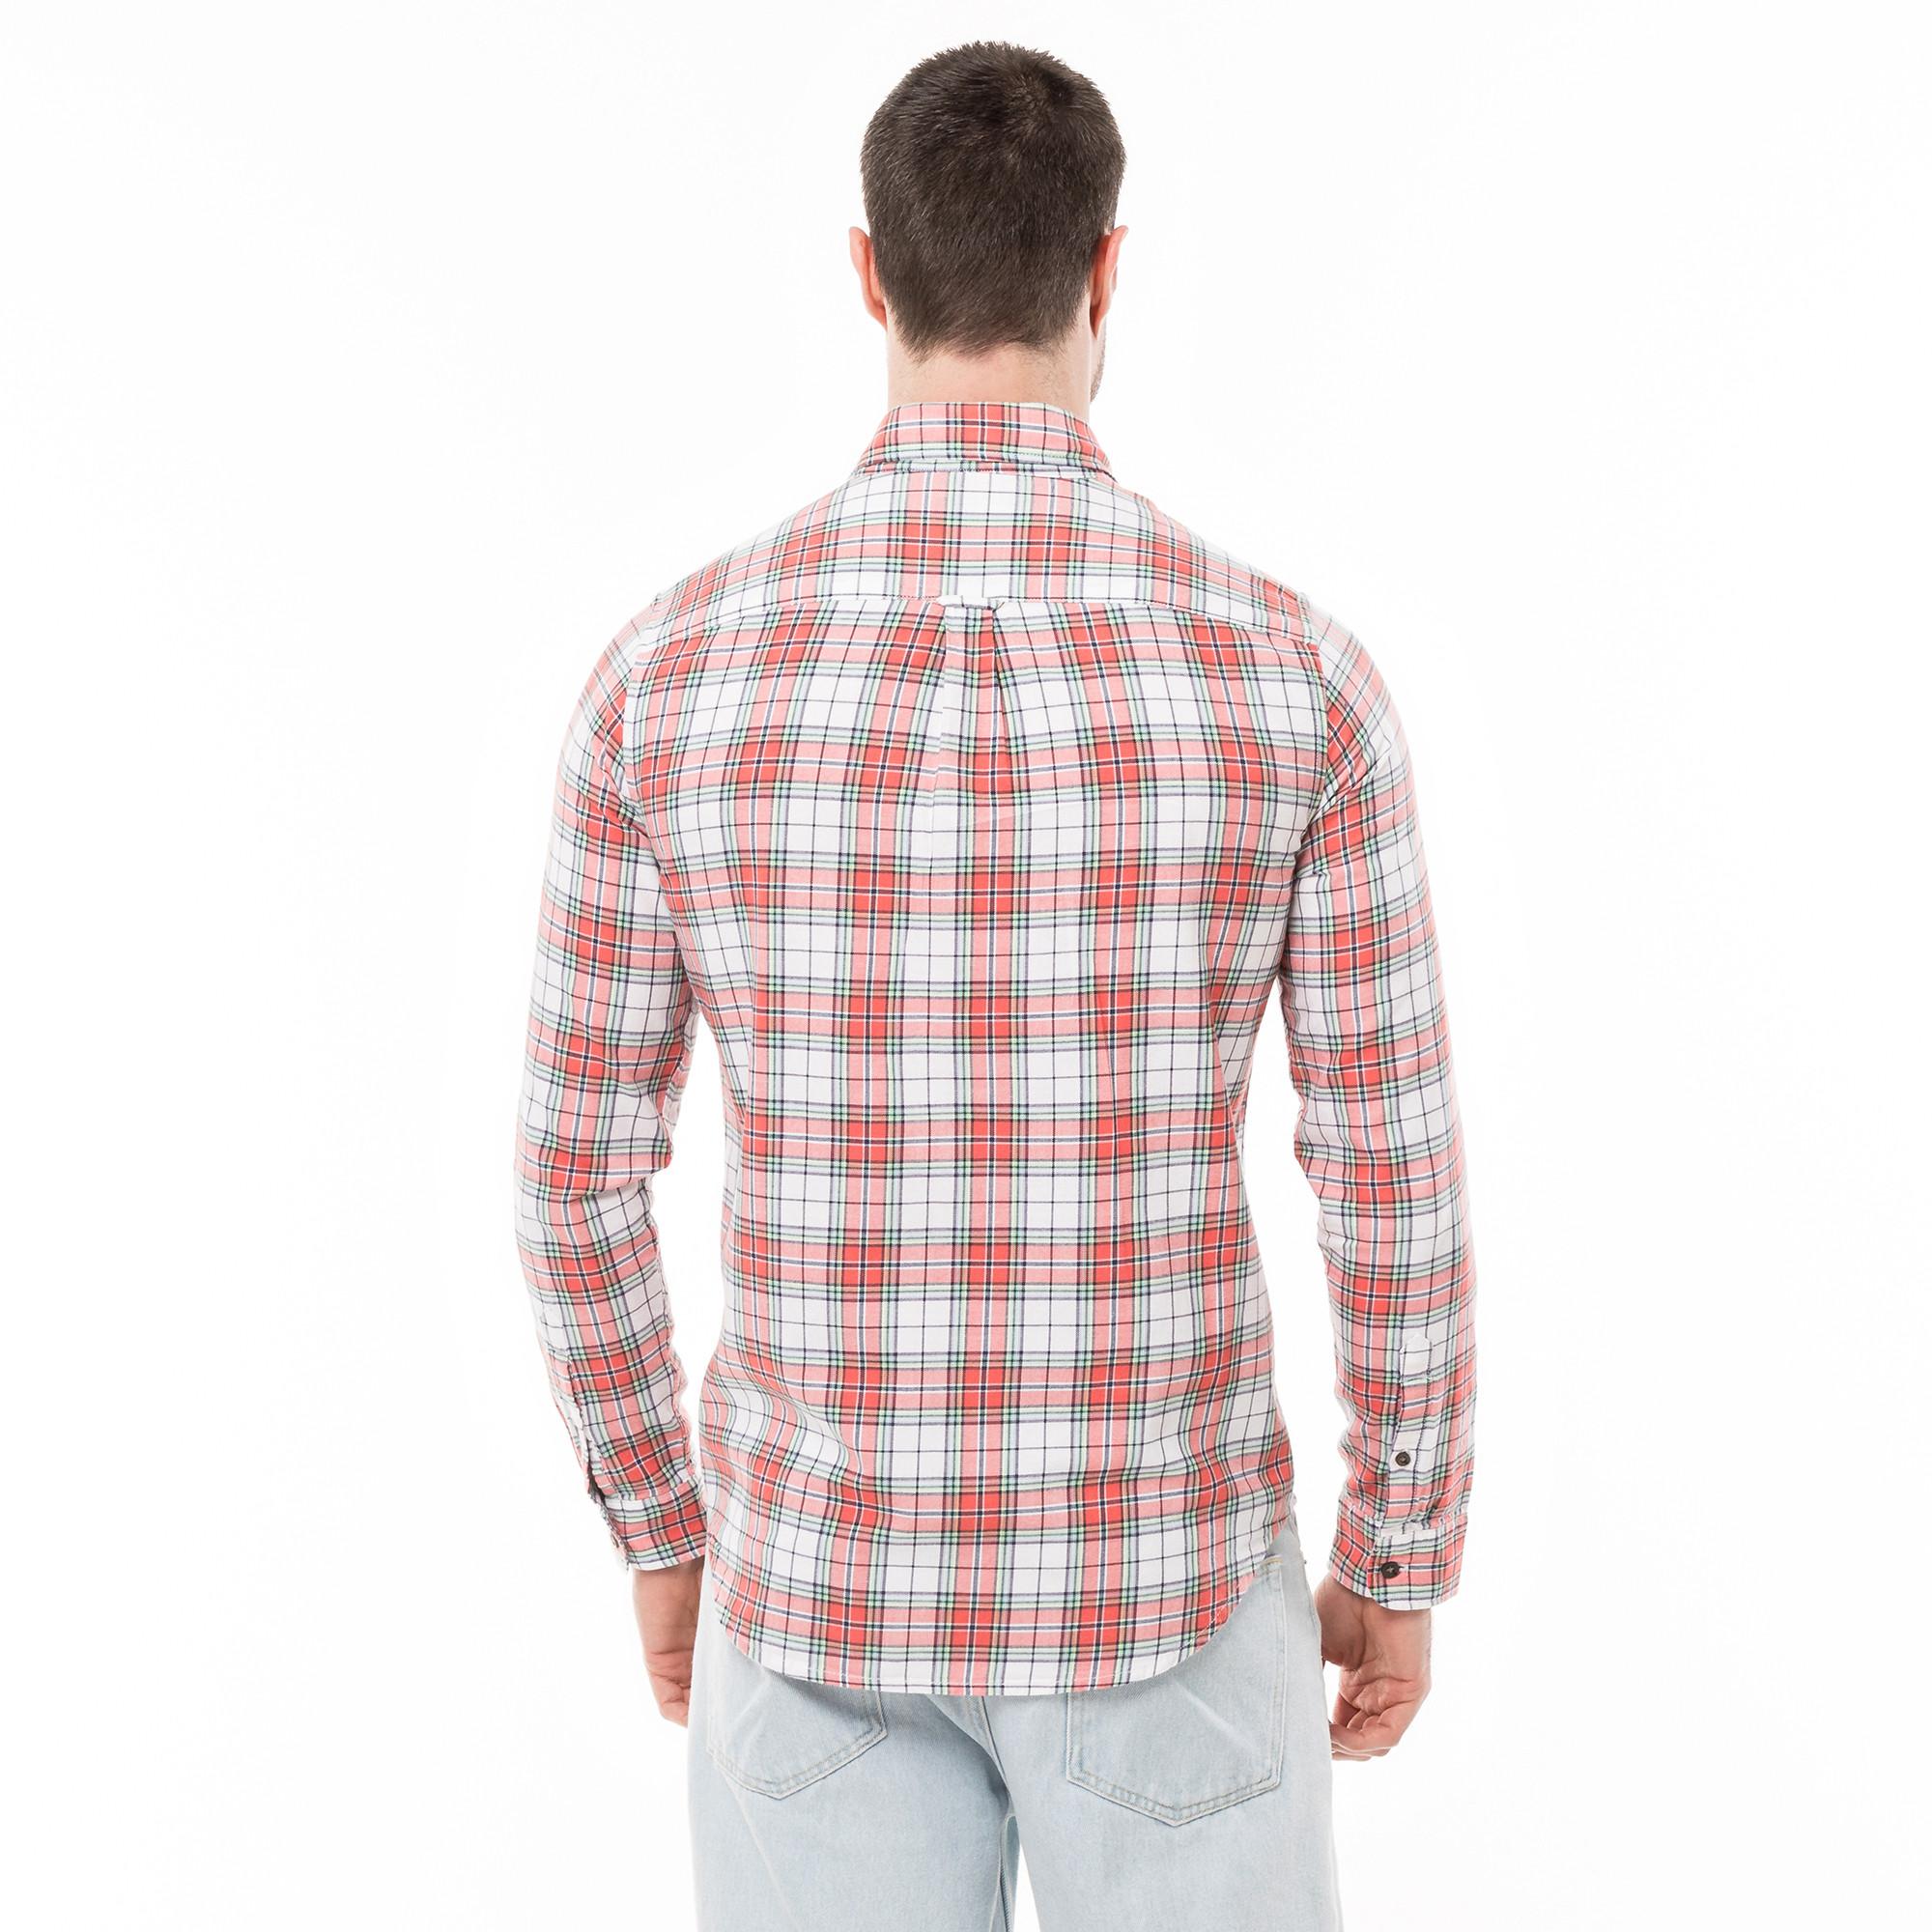 Superdry VINTAGE CHECK SHIRT Chemise, manches longues 